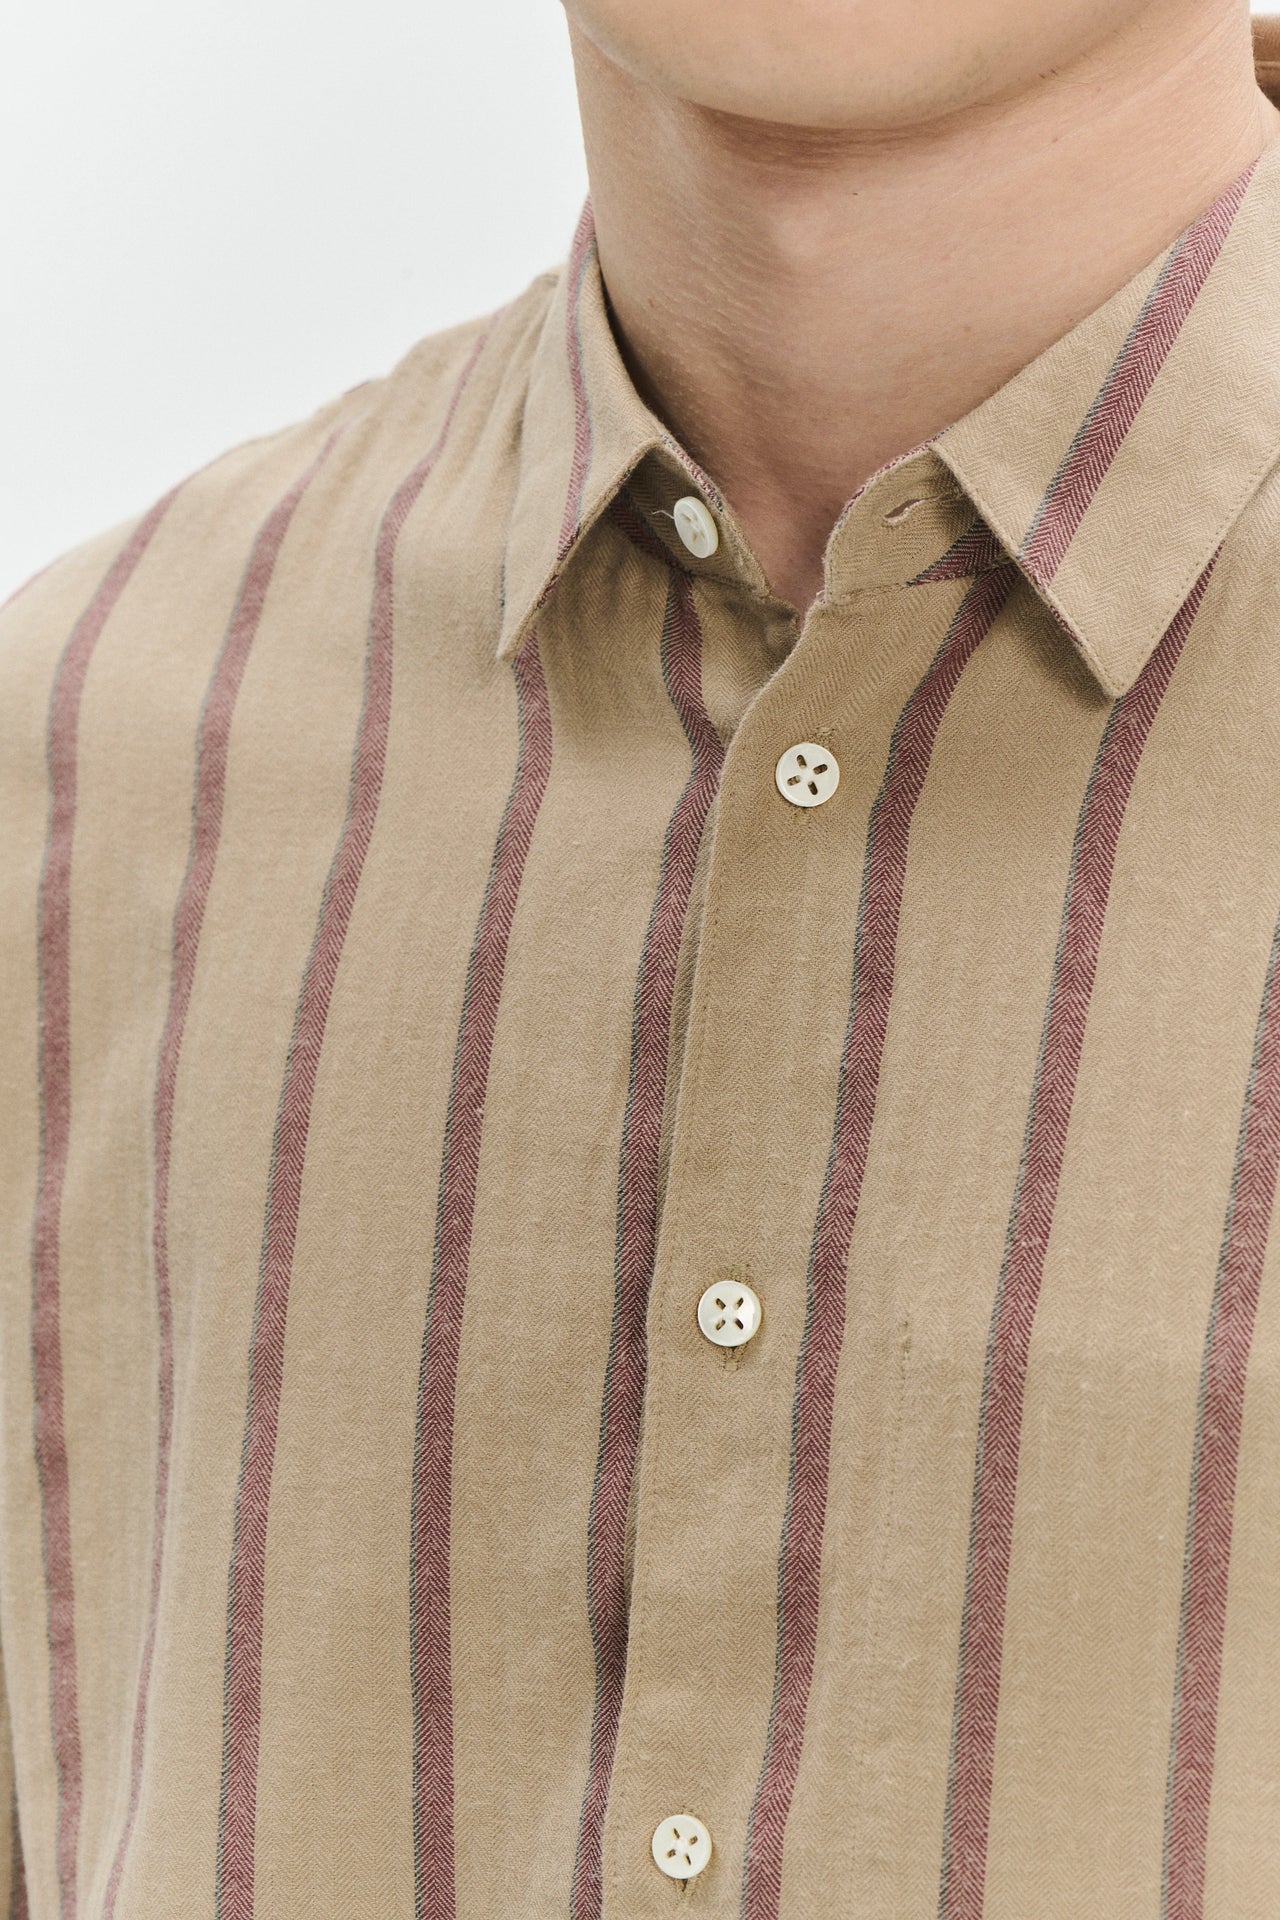 Feel Good Shirt in a Tonal Beige and Bordeaux Subtle Striped Herringbone Japanese Cotton Flannel